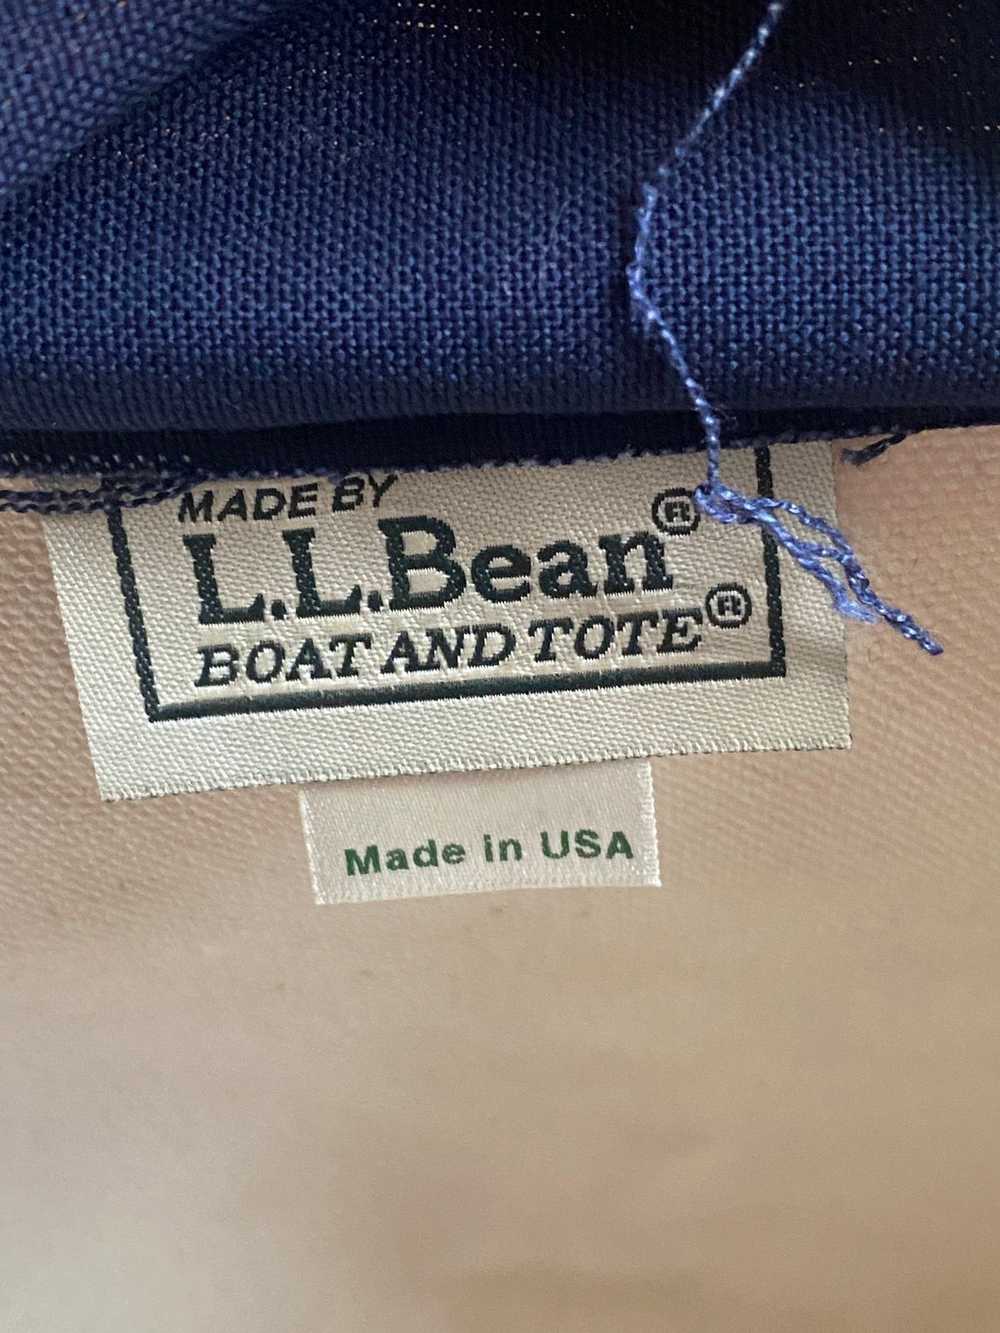 L.L. Bean LL Bean Embroidered Boat Tote - image 6